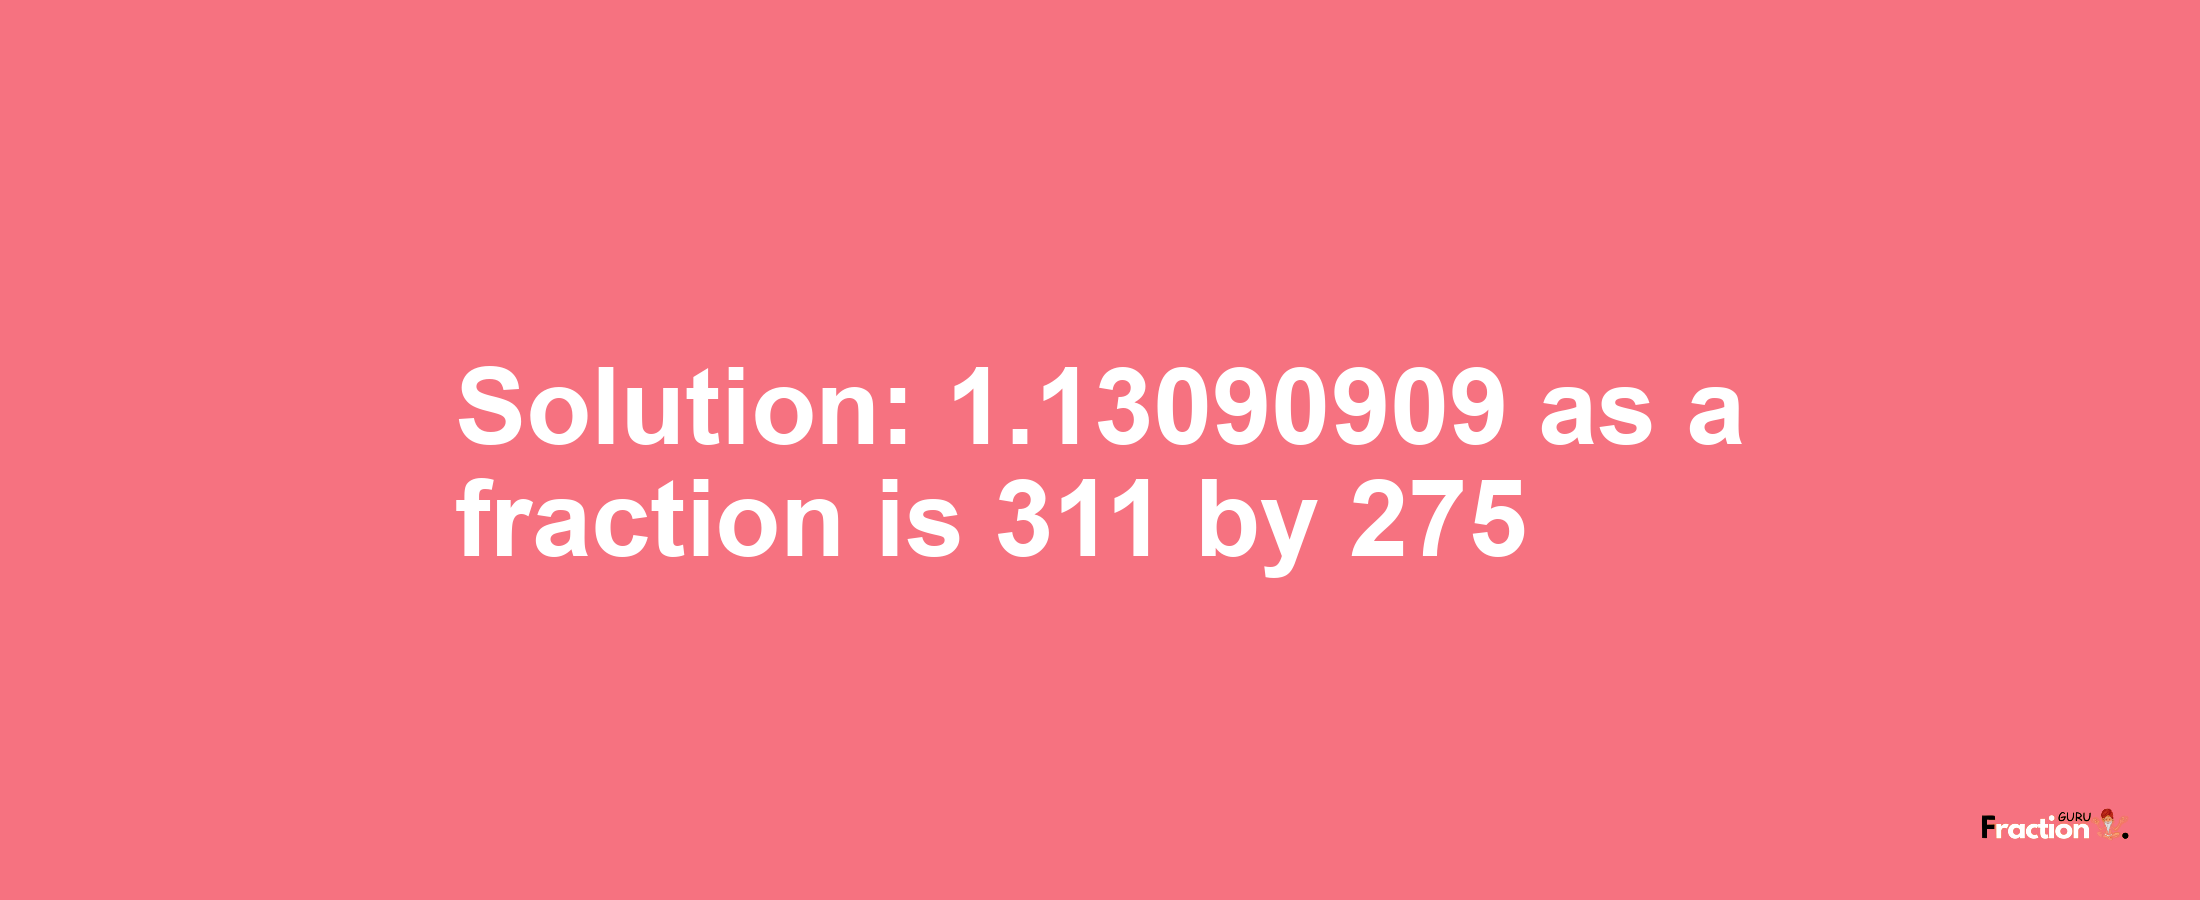 Solution:1.13090909 as a fraction is 311/275